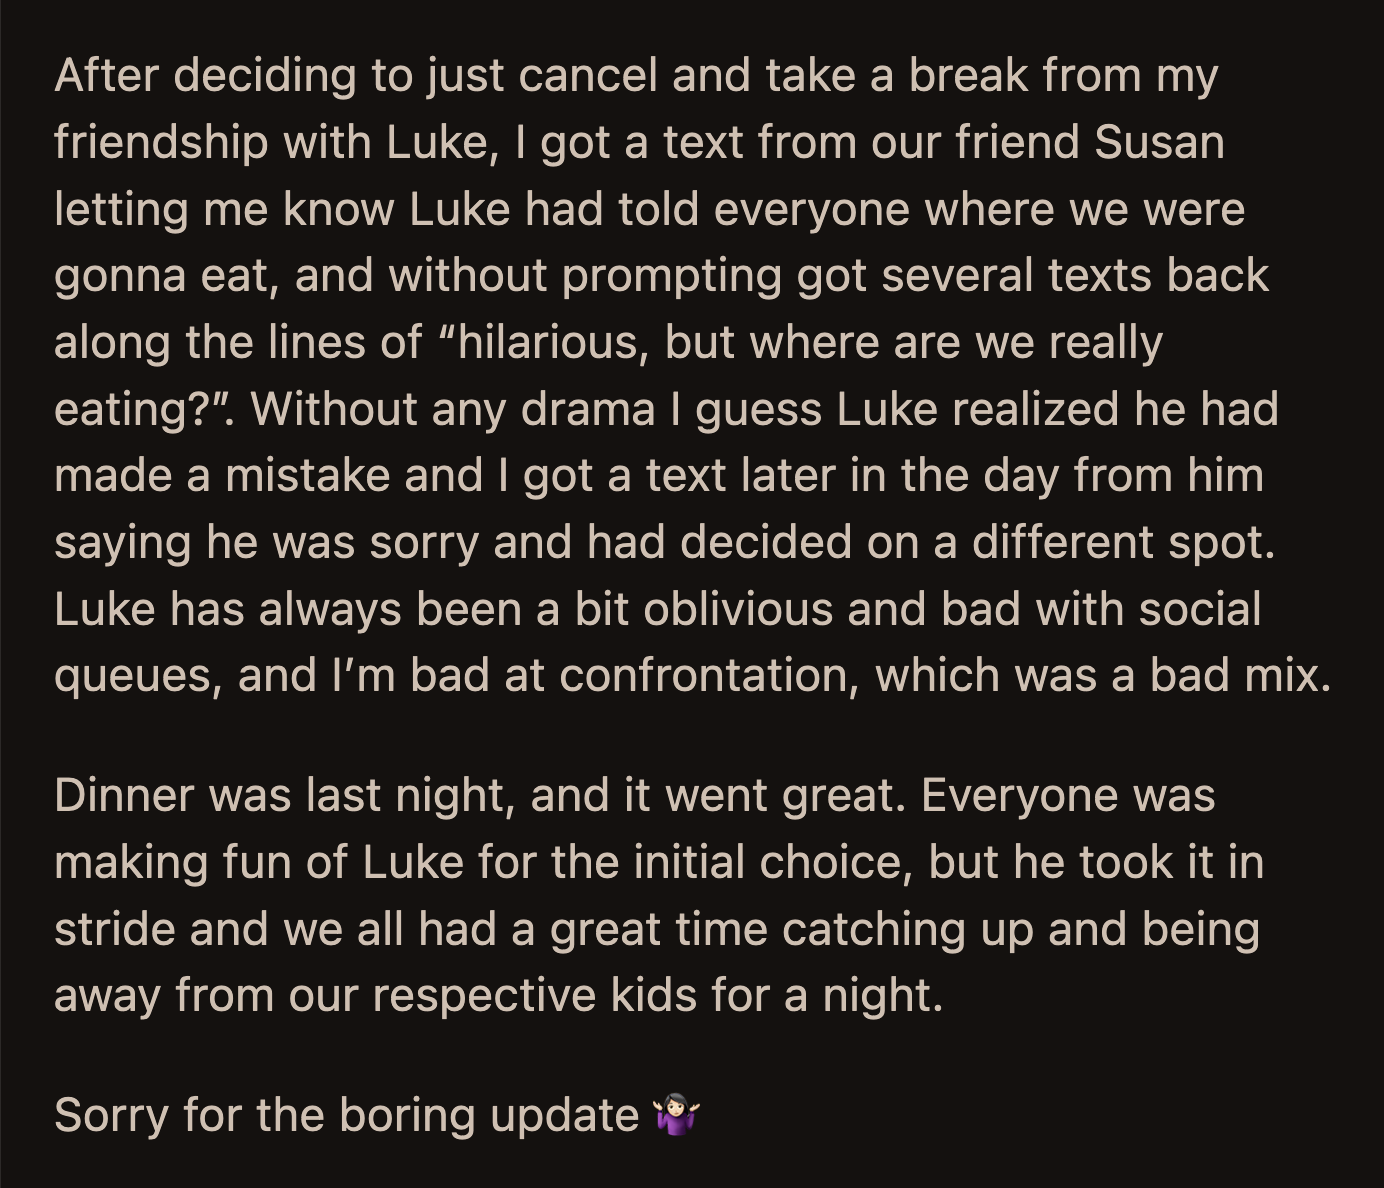 Before OP could rescind the offer, Luke apologized and made a reservation at a different restaurant.